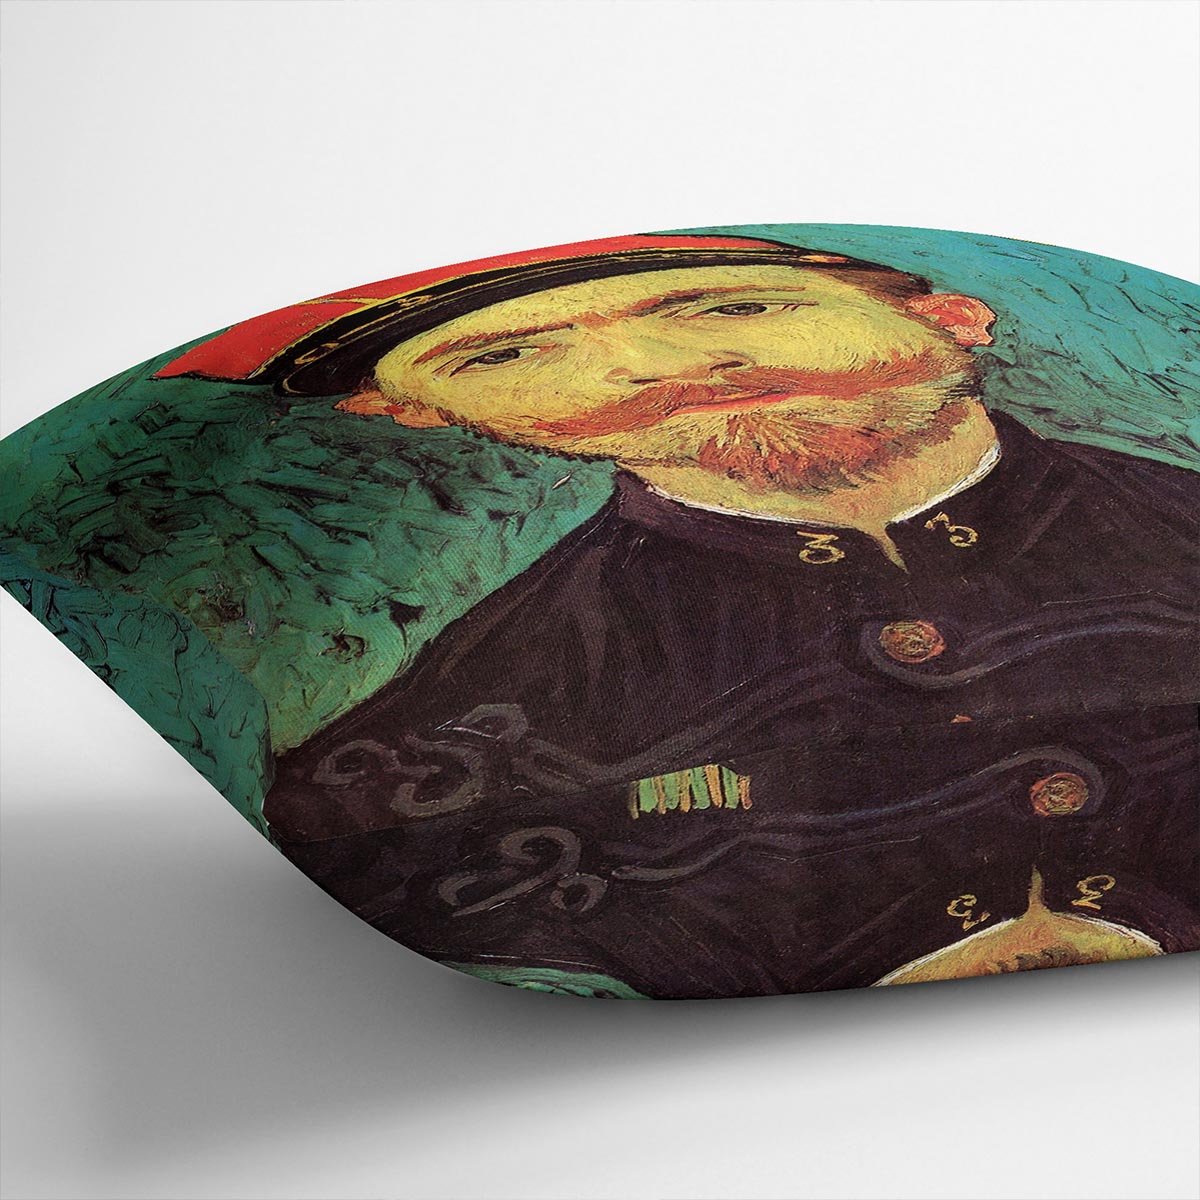 Portrait of Milliet Second Lieutenant of the Zouaves by Van Gogh Throw Pillow